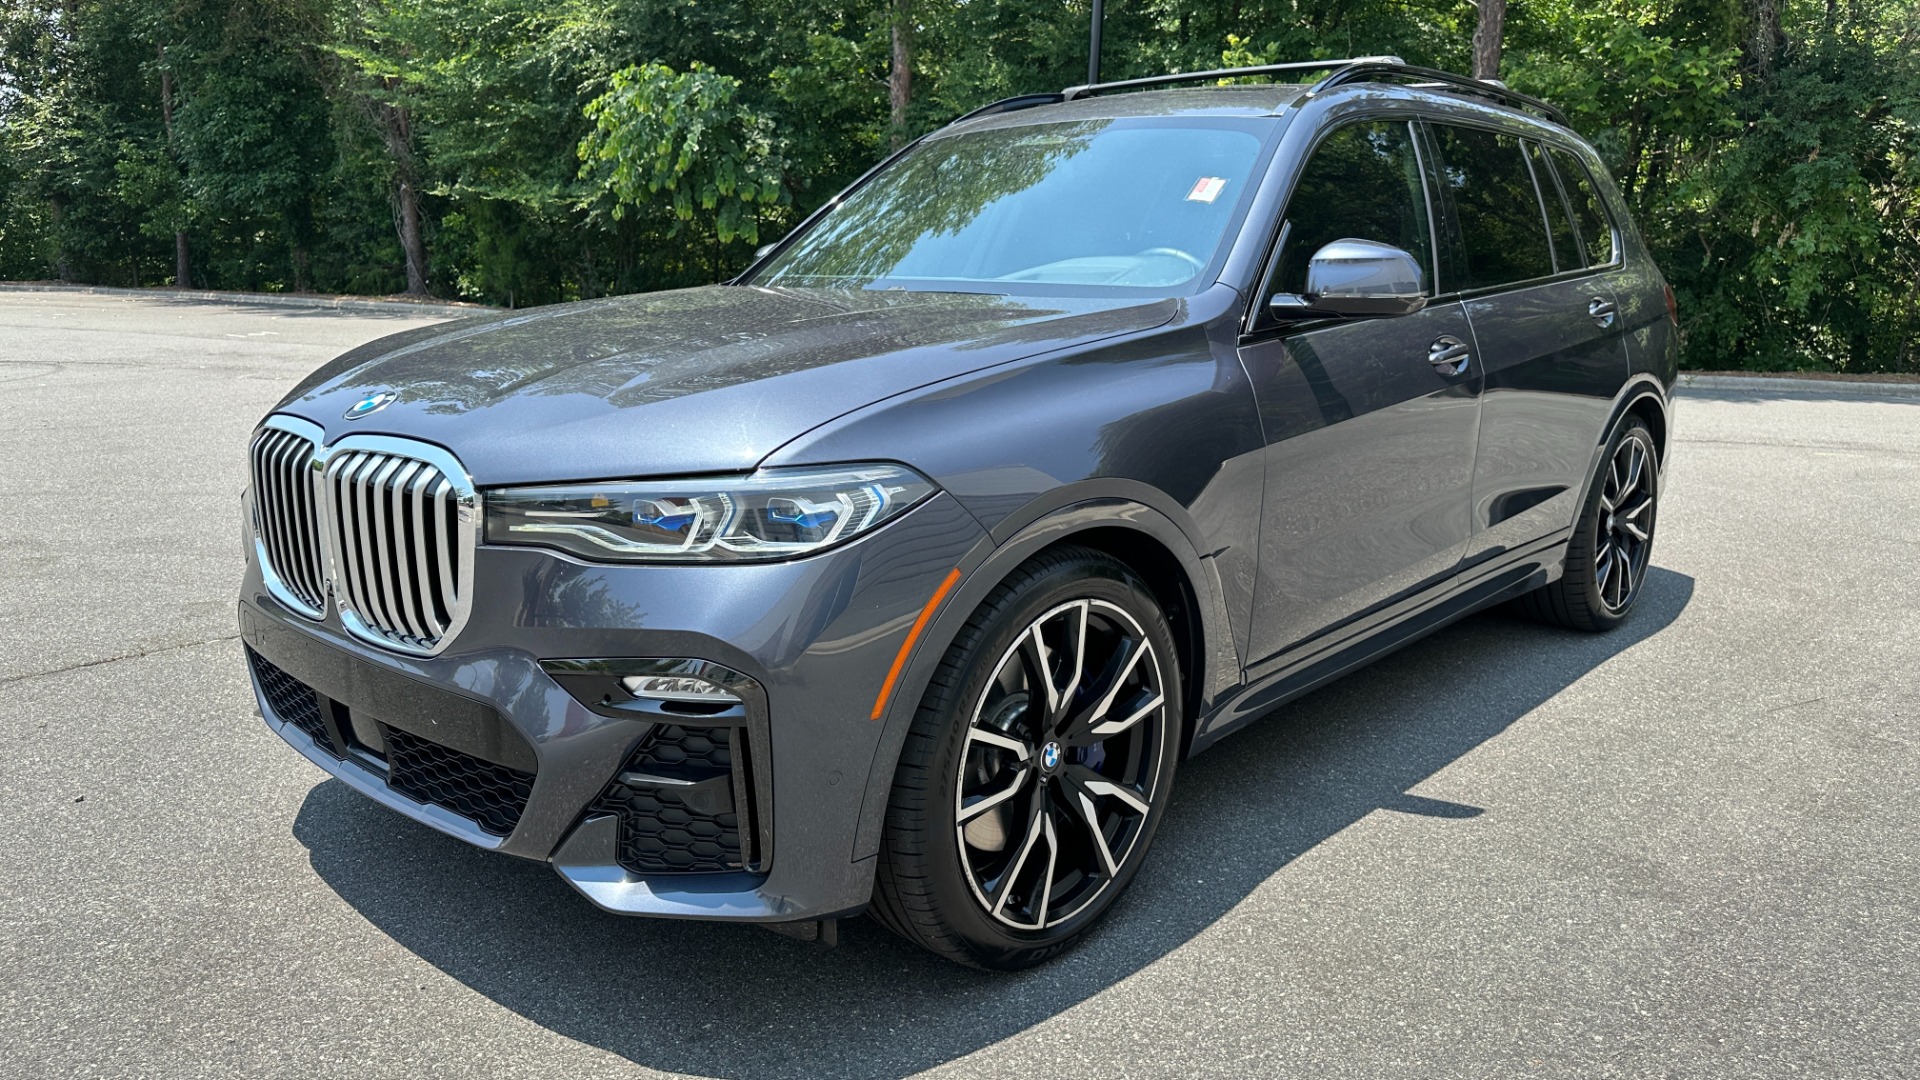 Used 2019 BMW X7 xDrive50i / EXECUTIVE / M SPORT / EXECUTIVE / DYNAMIC HANDLING / LEATHER for sale $53,800 at Formula Imports in Charlotte NC 28227 2